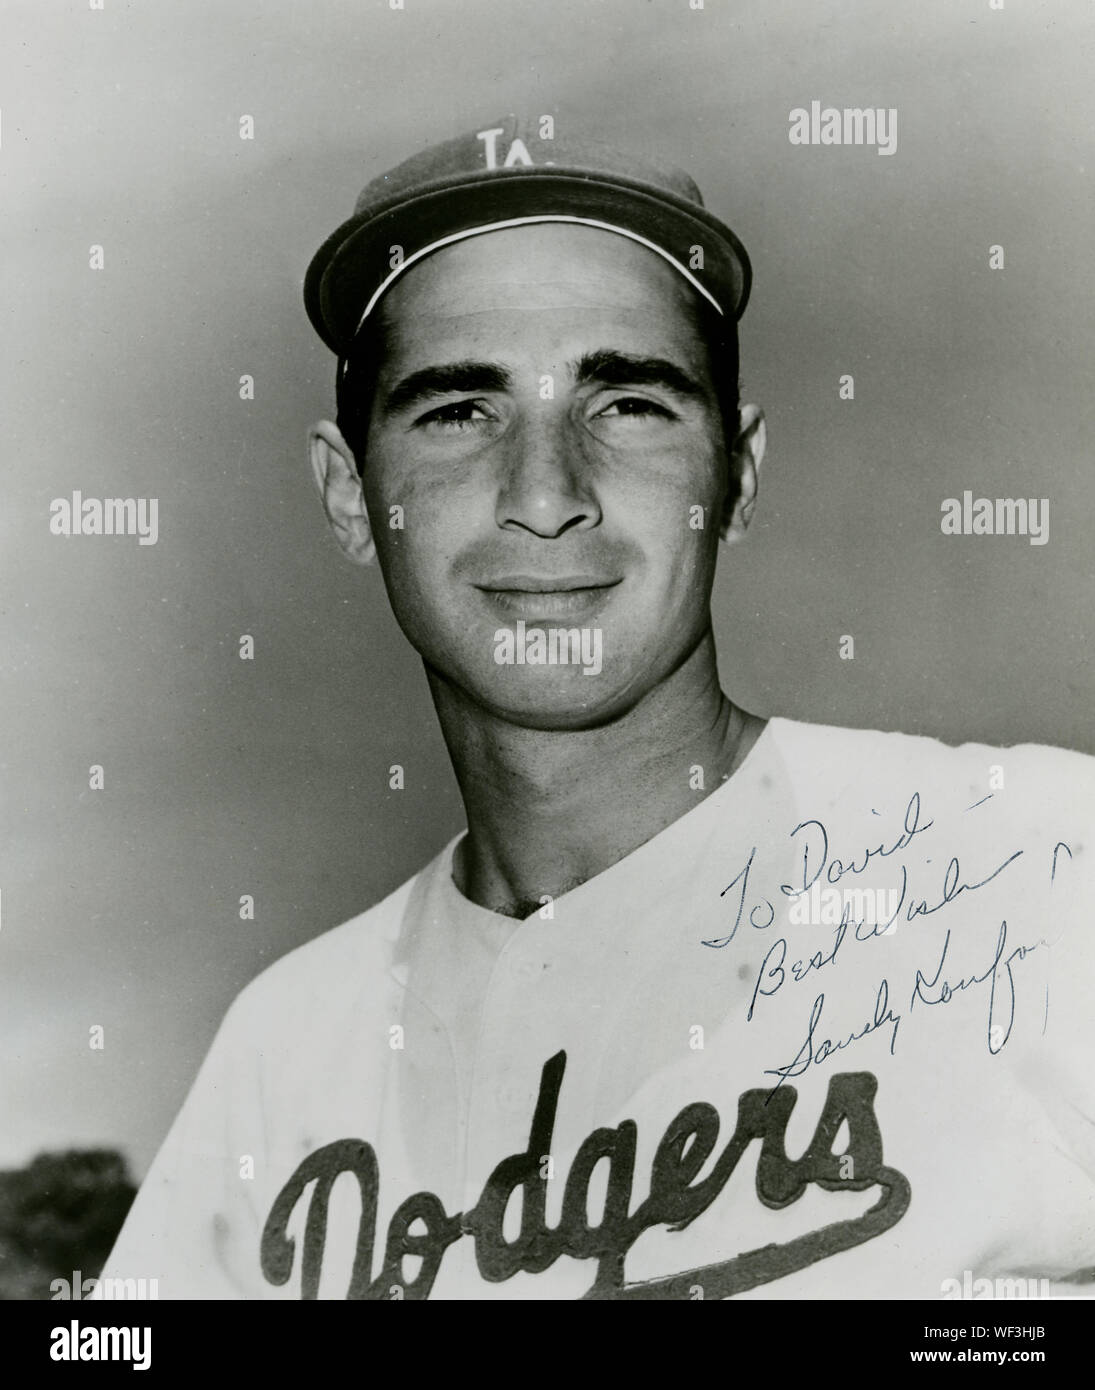 Los angeles dodgers 50th anniversary hi-res stock photography and images -  Alamy